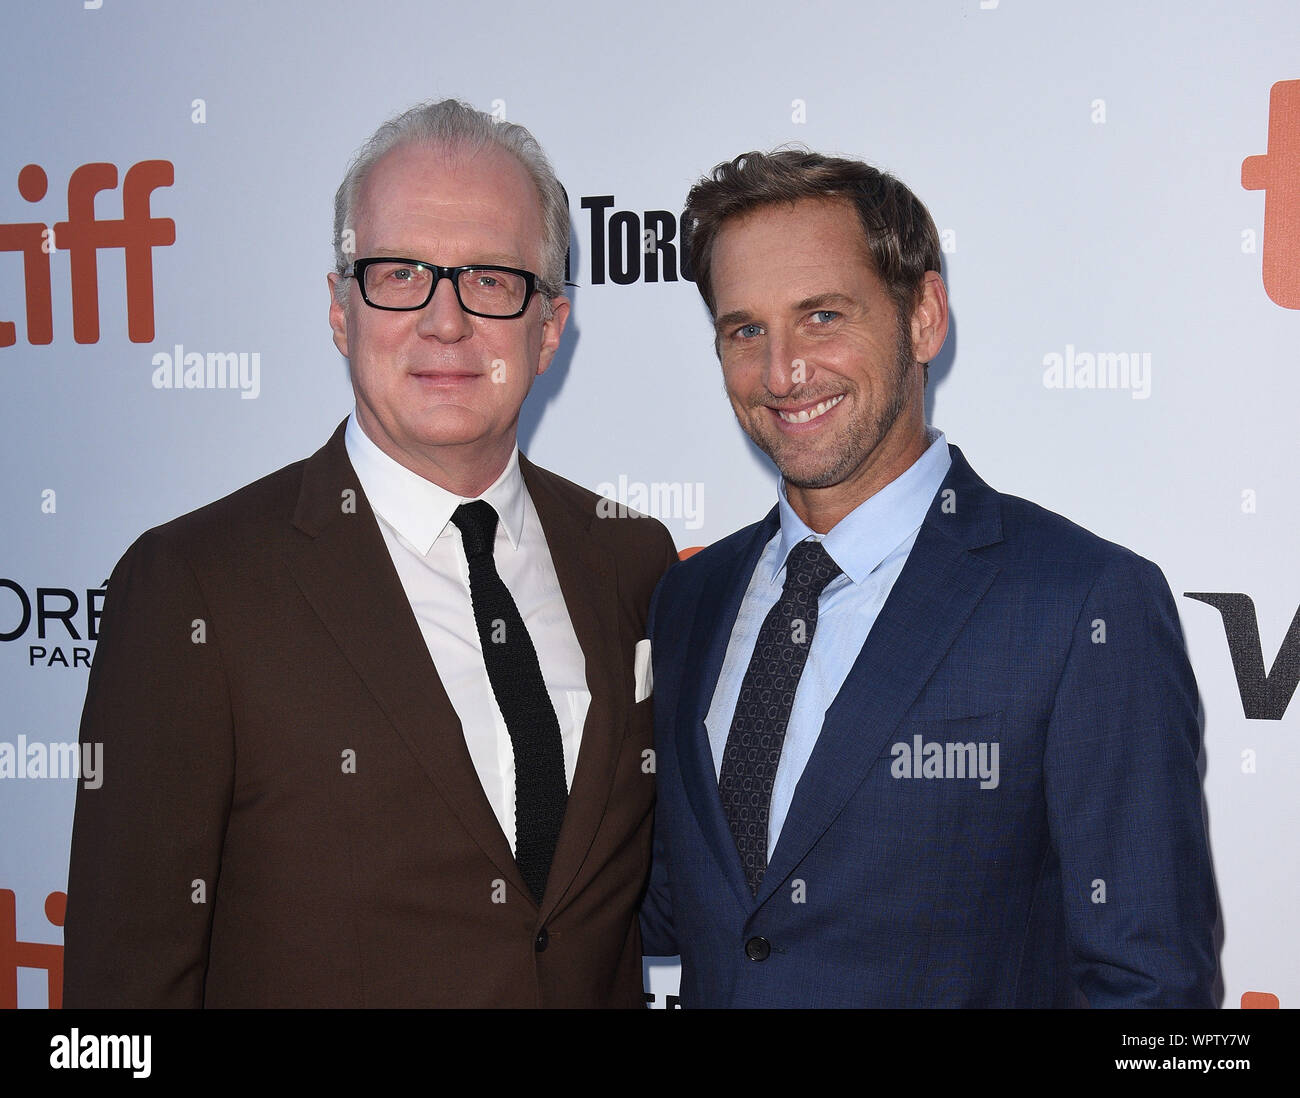 TORONTO, ONTARIO - SEPTEMBER 09: Josh Lucas and Tracy Letts attends the 'Ford v Ferrari' premiere during the 2019 Toronto International Film Festival at Roy Thomson Hall on September 09, 2019 in Toronto, Canada. Photo: imageSPACE/MediaPunch Credit: MediaPunch Inc/Alamy Live News Stock Photo